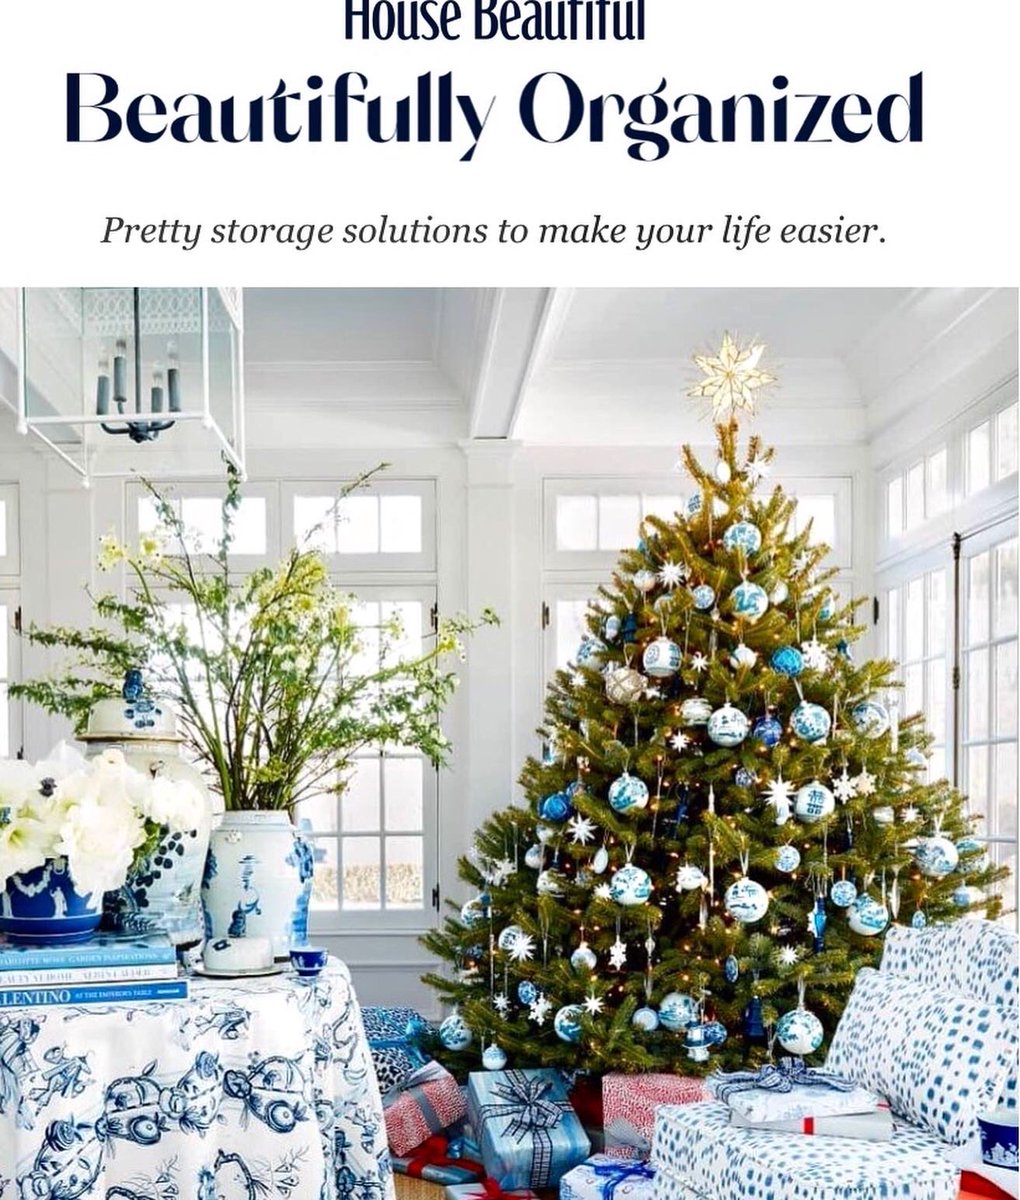 Create a beautiful #blueandwhite #Christmas tree with #ornaments enchantedhome.com as seen in @HouseBeautiful